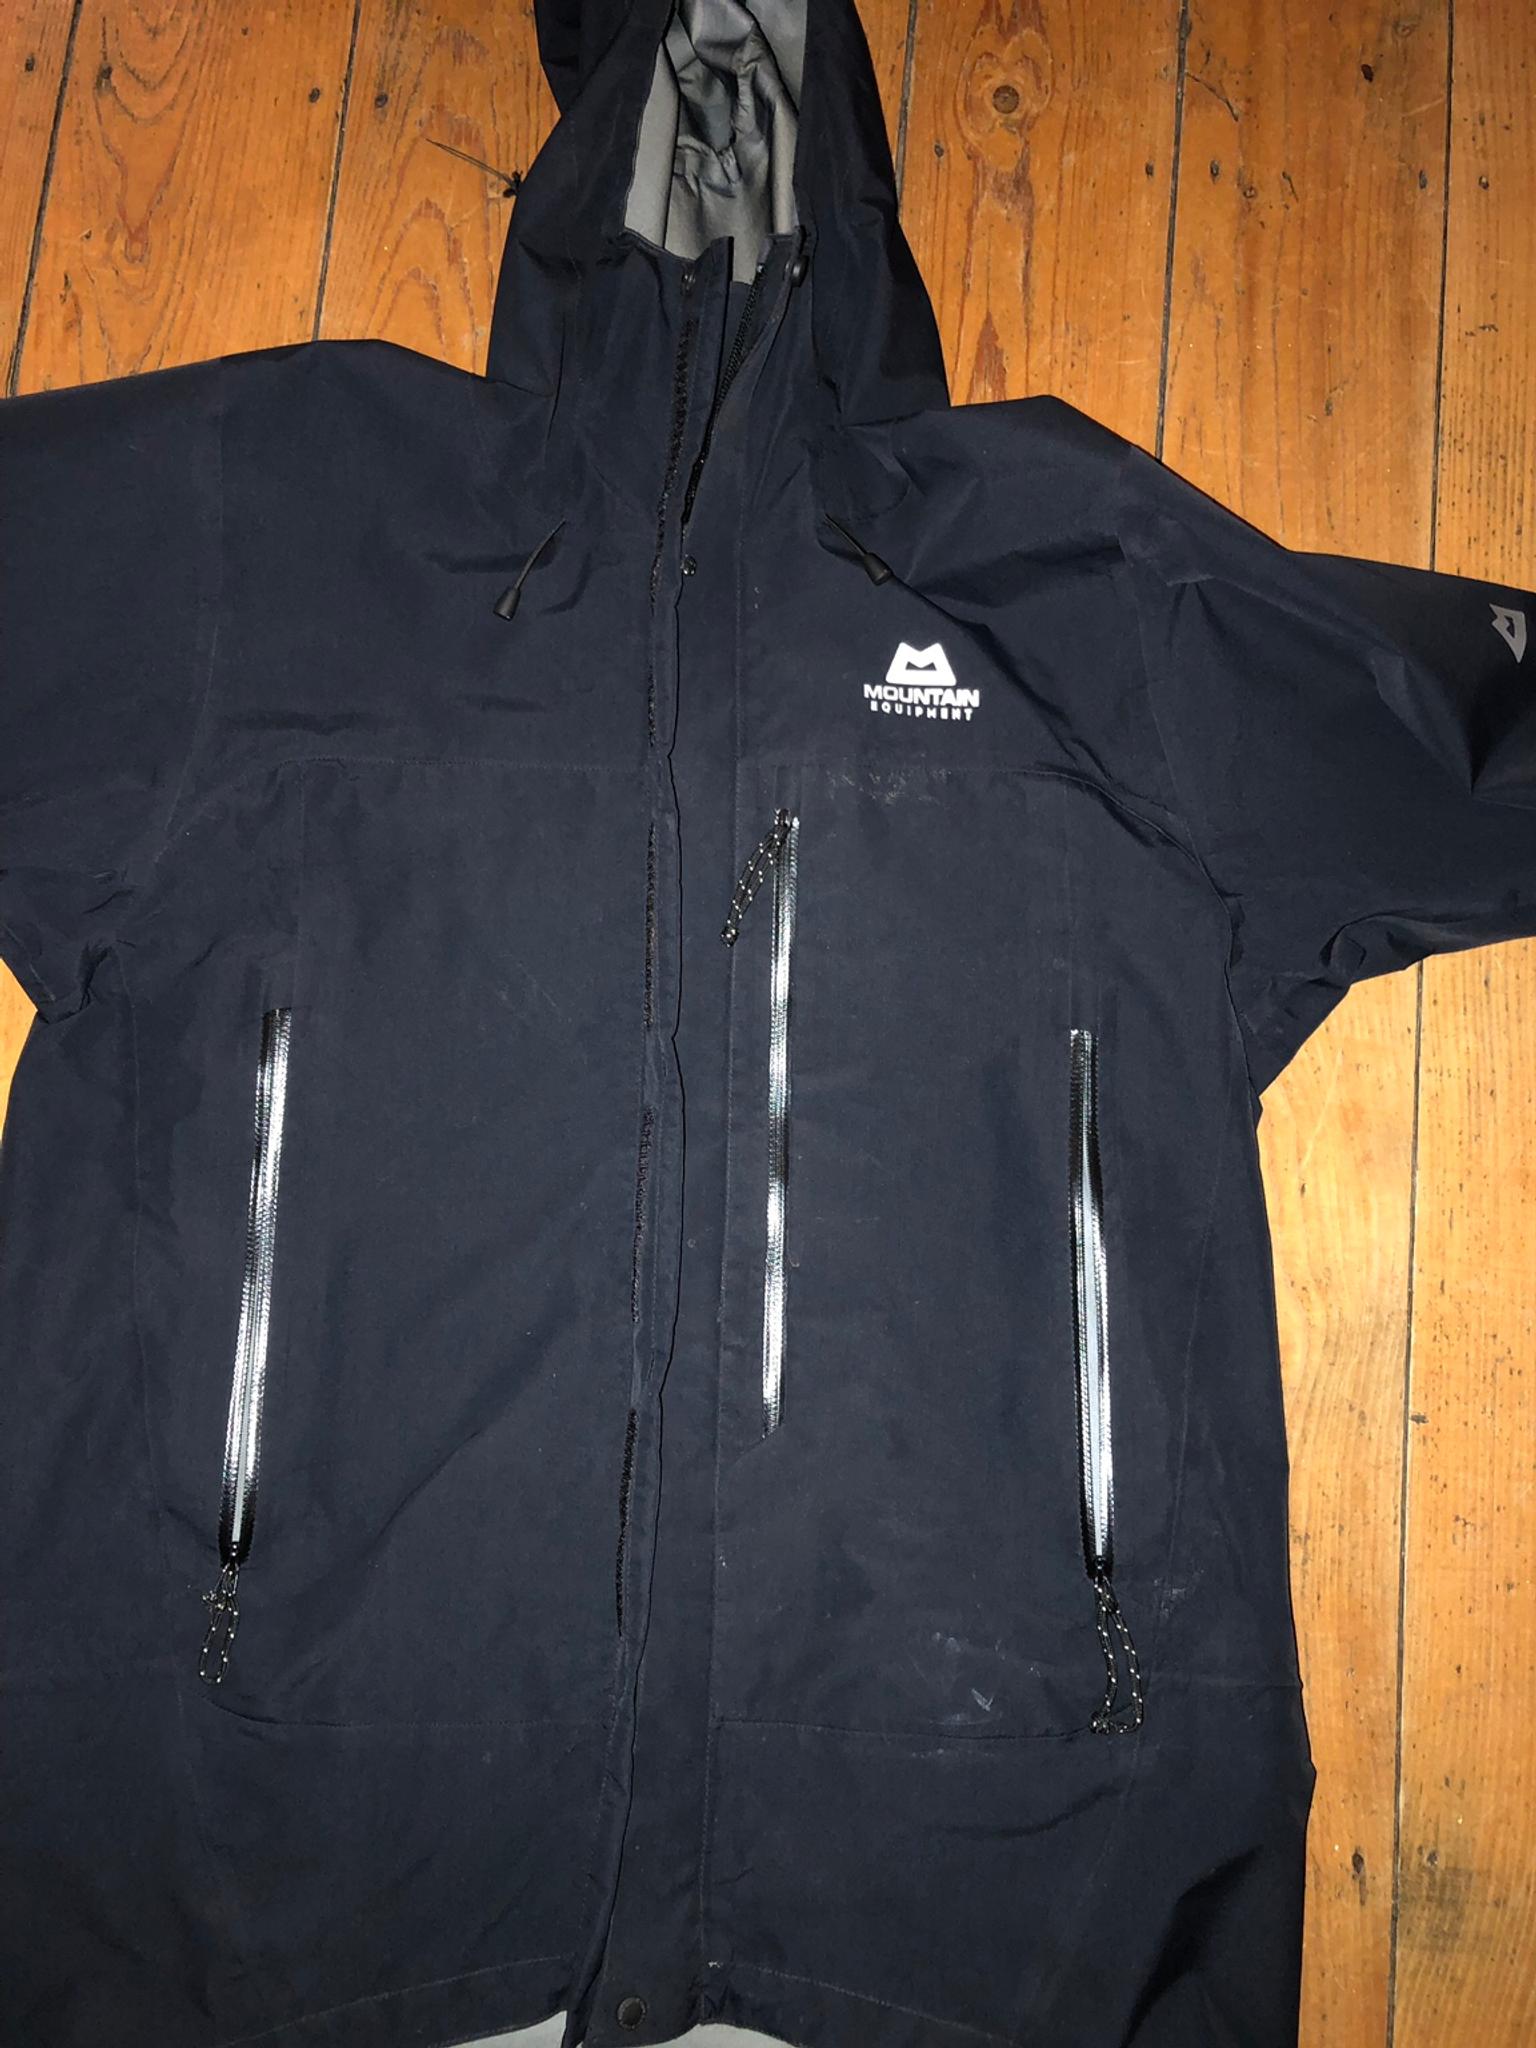 Mountain Equipment Gore Tex Jacket In M32 Trafford For 25 00 For Sale Shpock